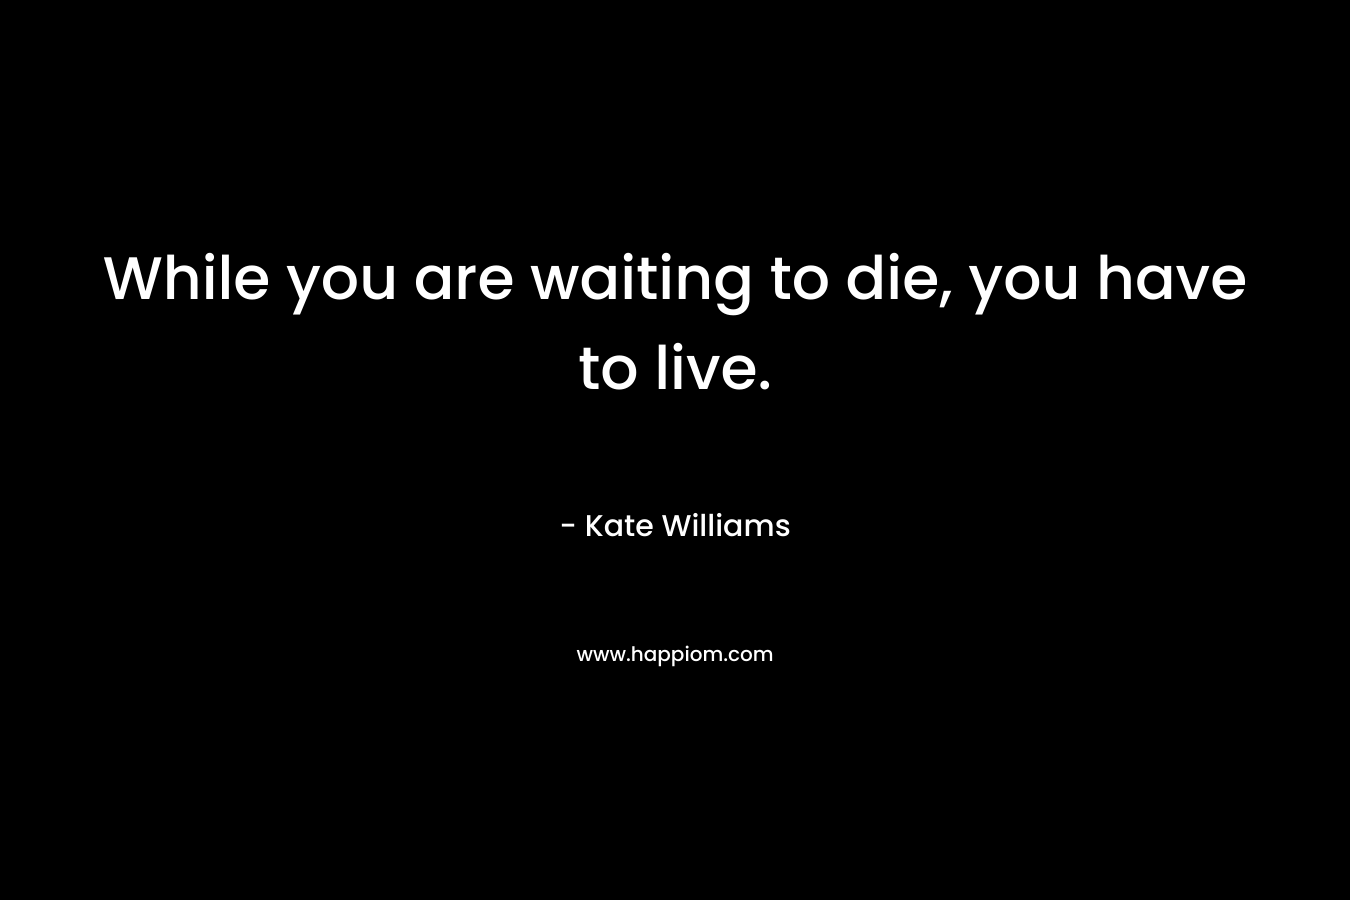 While you are waiting to die, you have to live.